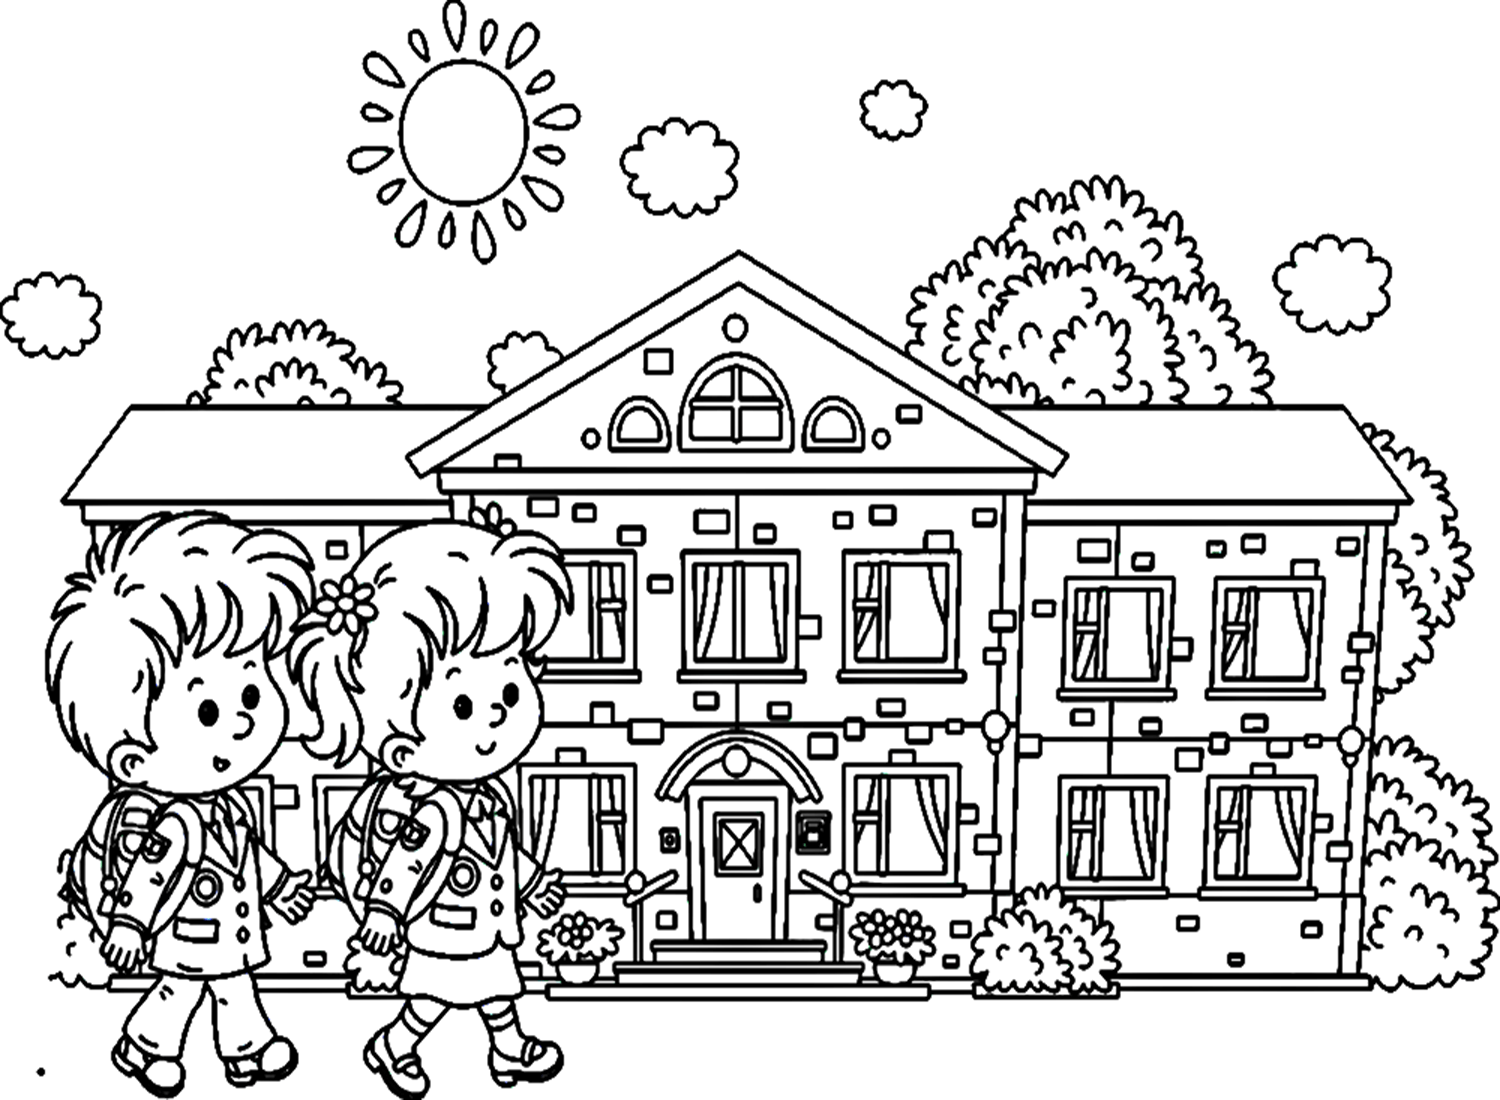 September Coloring Pages Free from September